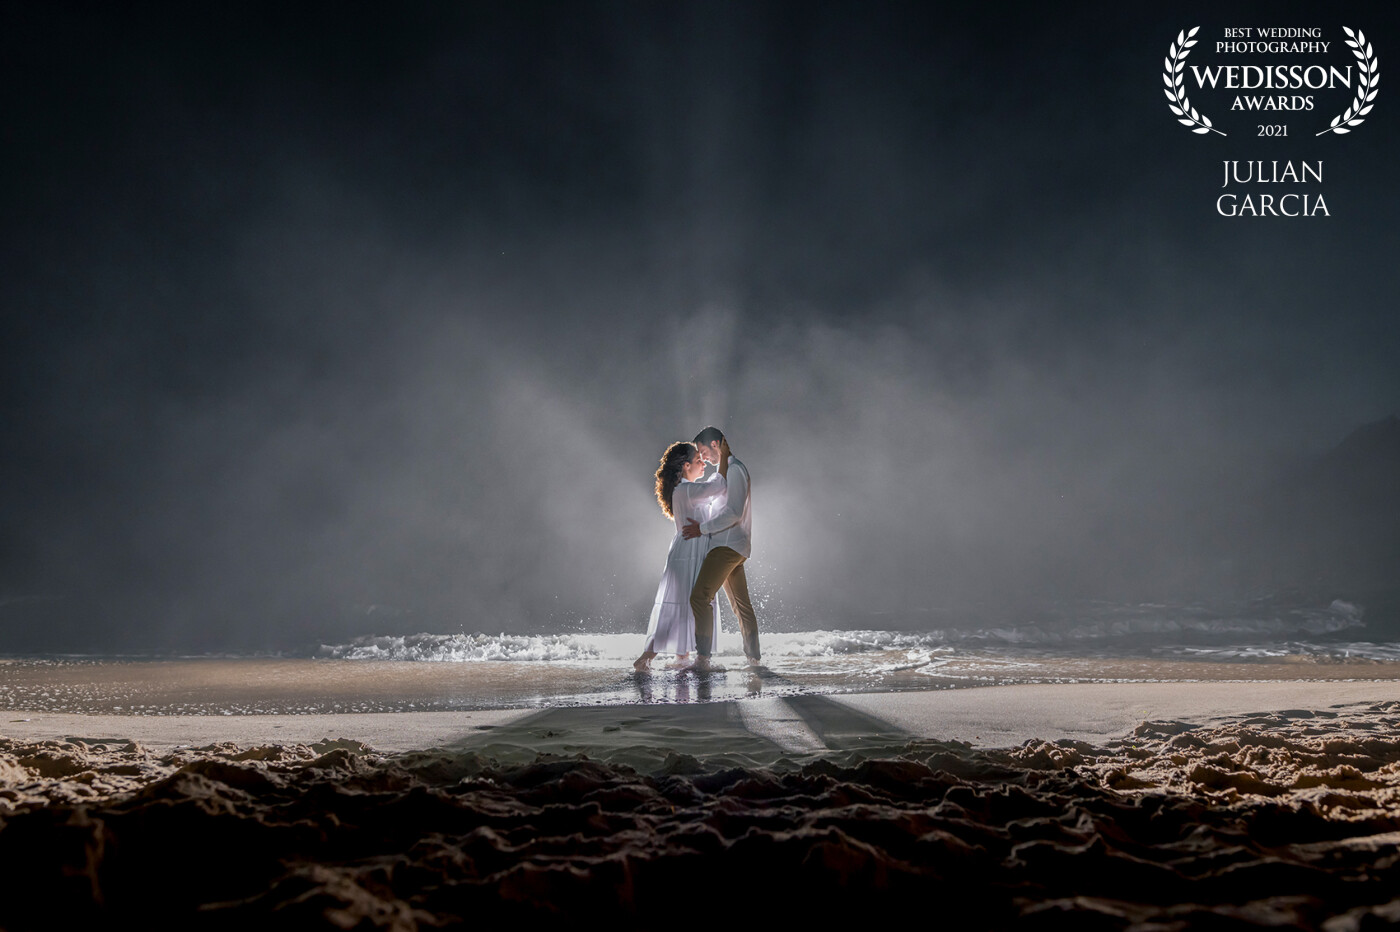 I always think that the beach gives you what you don't expect, the mist of the night gives you a spectacular photo with the appropriate lighting, a pre-wedding where nothing was missing, a romantic movie ending.